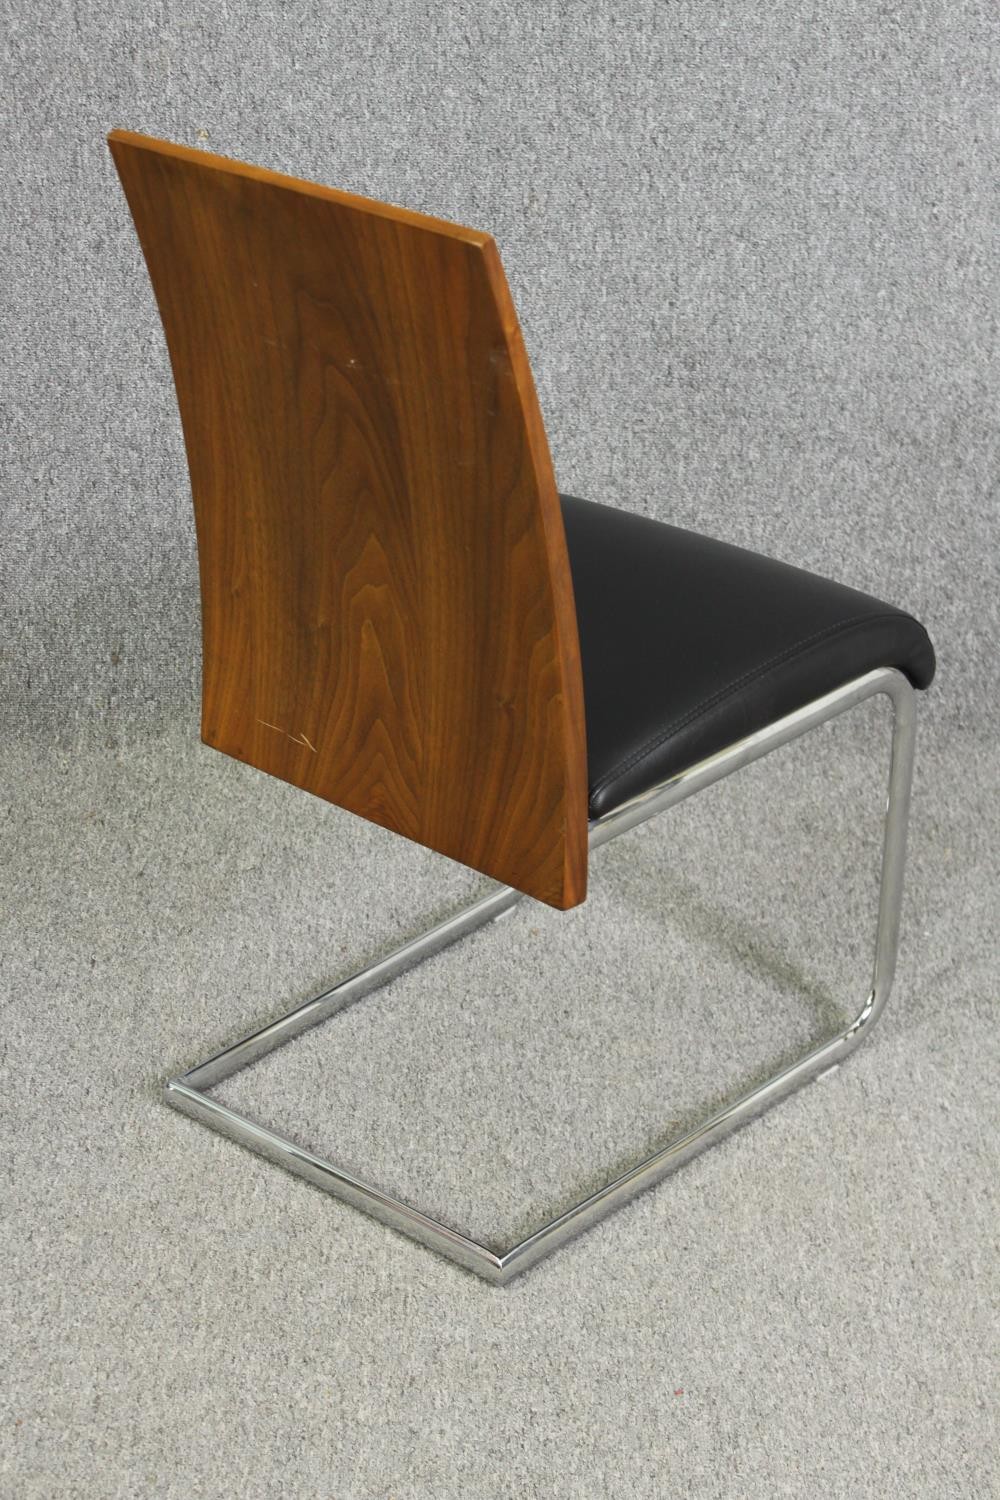 Withdrawn - Dining chairs, a set of six, contemporary, chrome and leather upholstered. - Image 4 of 7